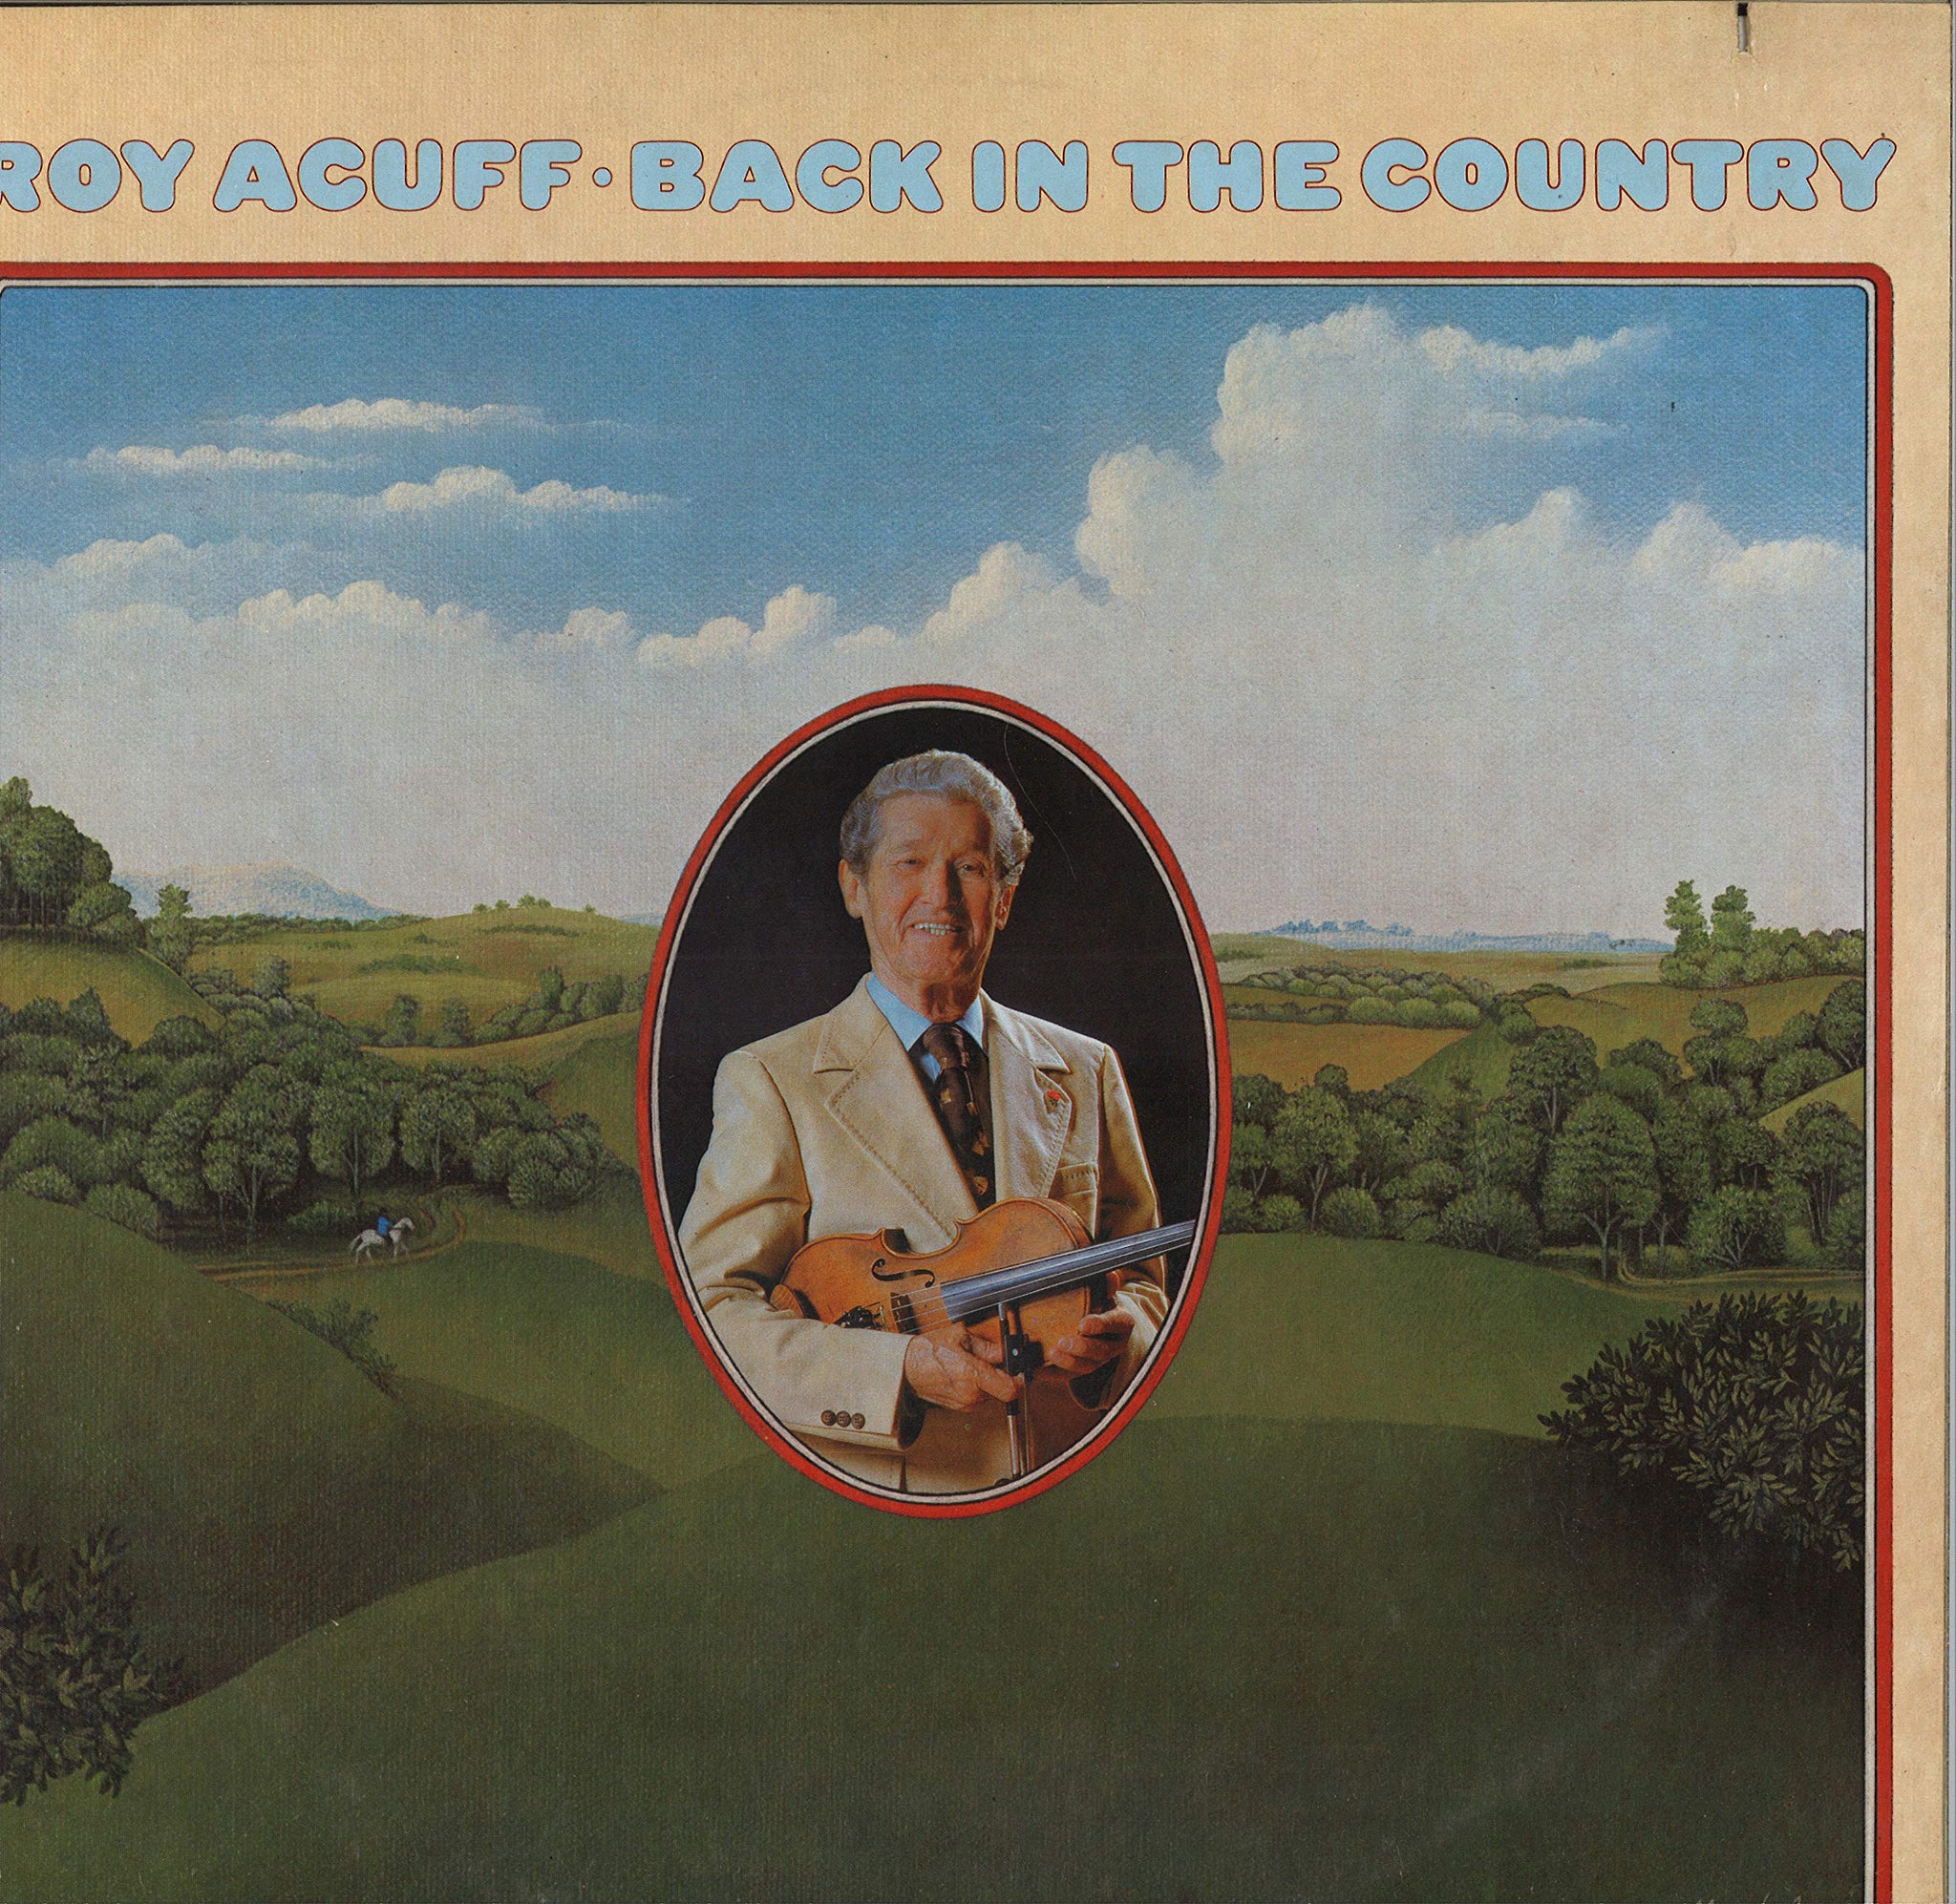 Roy Acuff Back In The Country